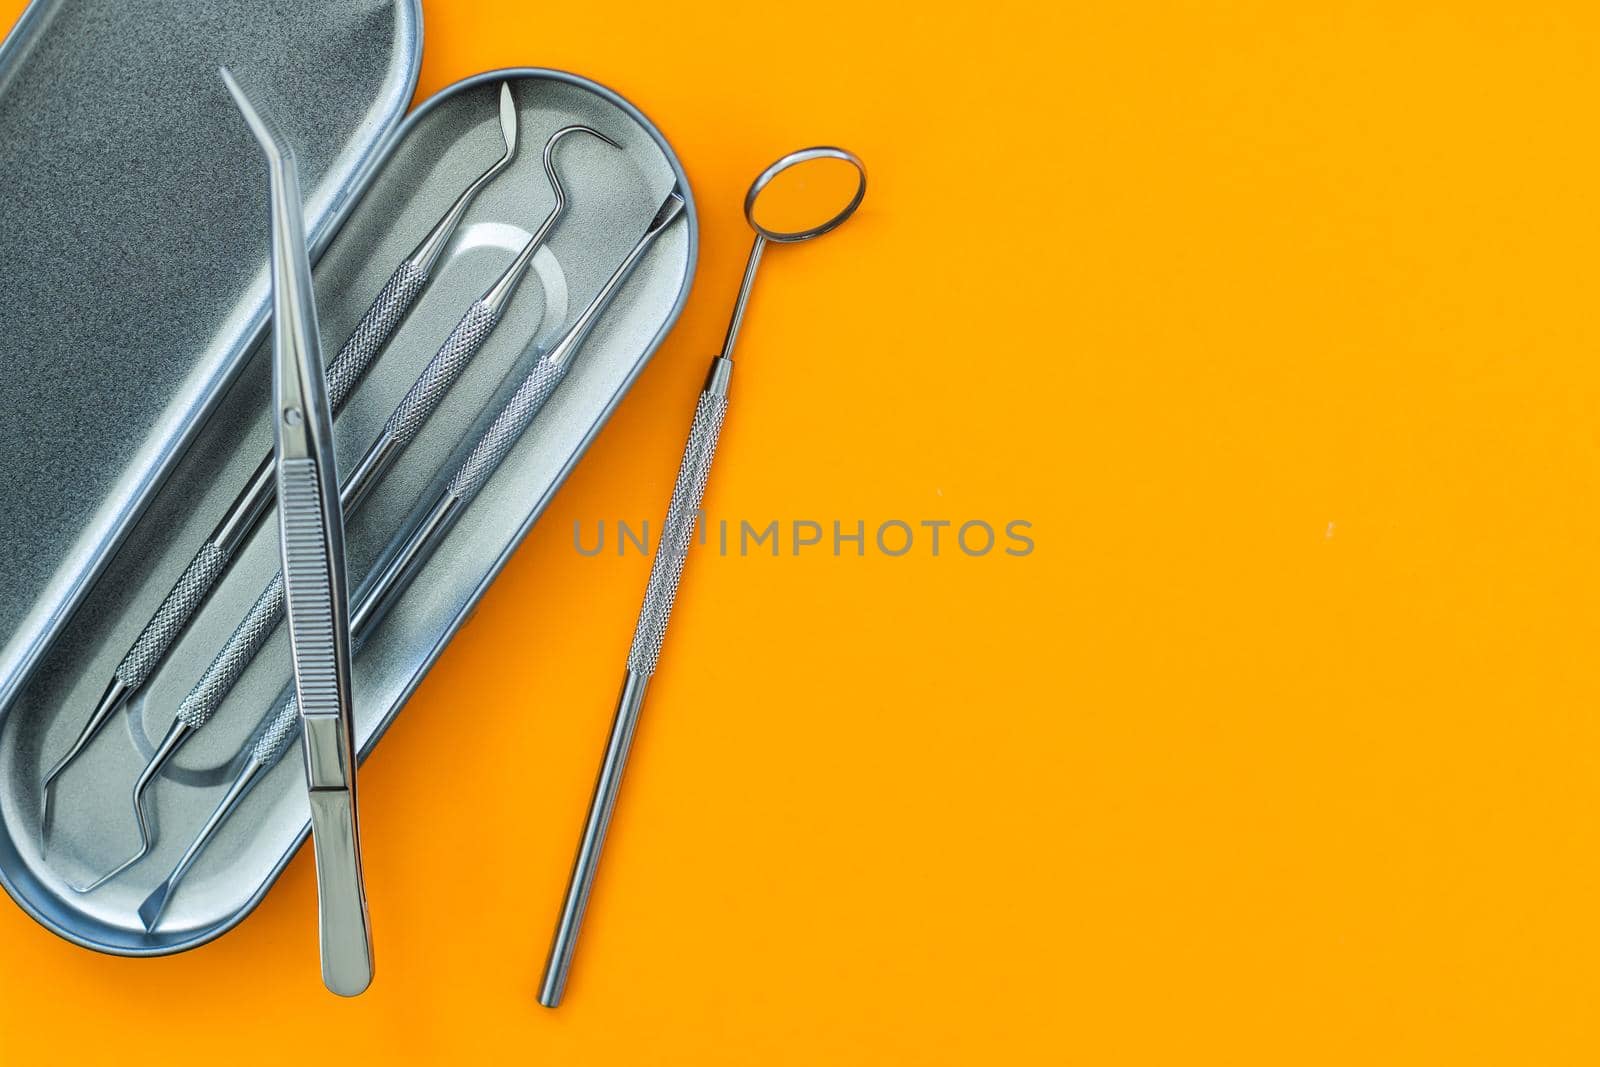 Dentist tools. Teethcare, dental health concept. orange background top view copy space.